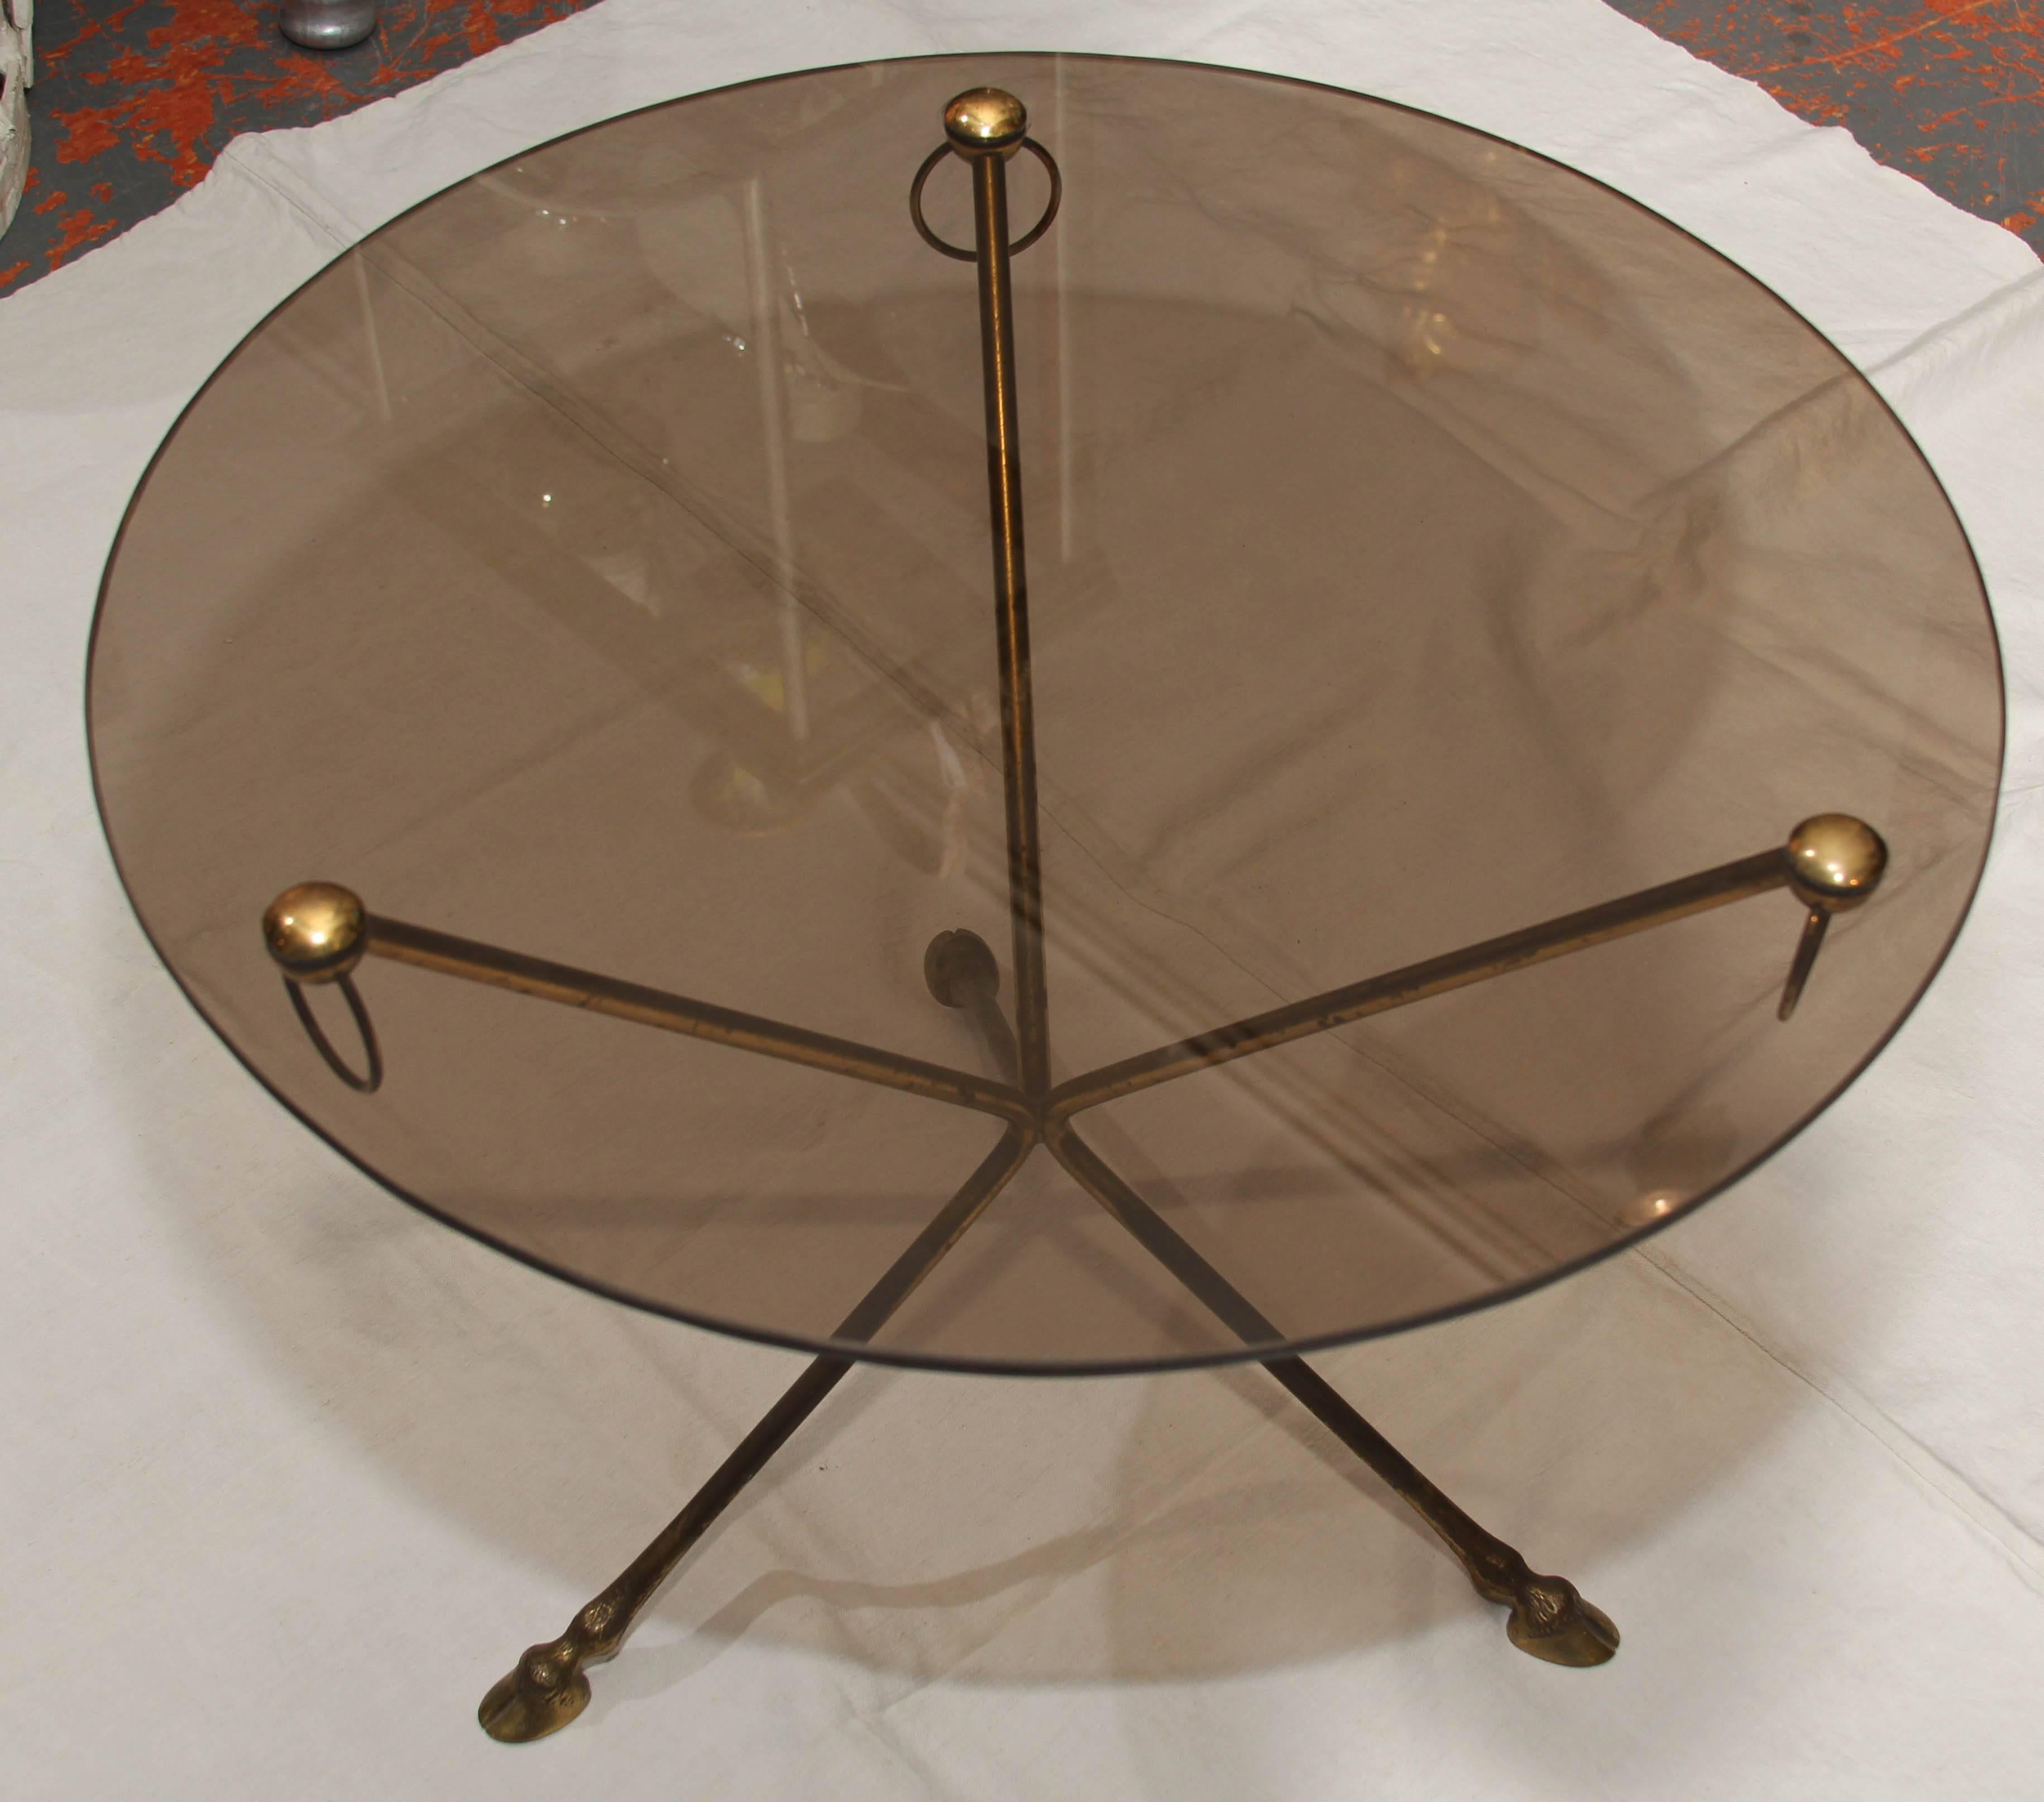 Midcentury French Glass and Brass Tripod Table with Deer-Hoof  2